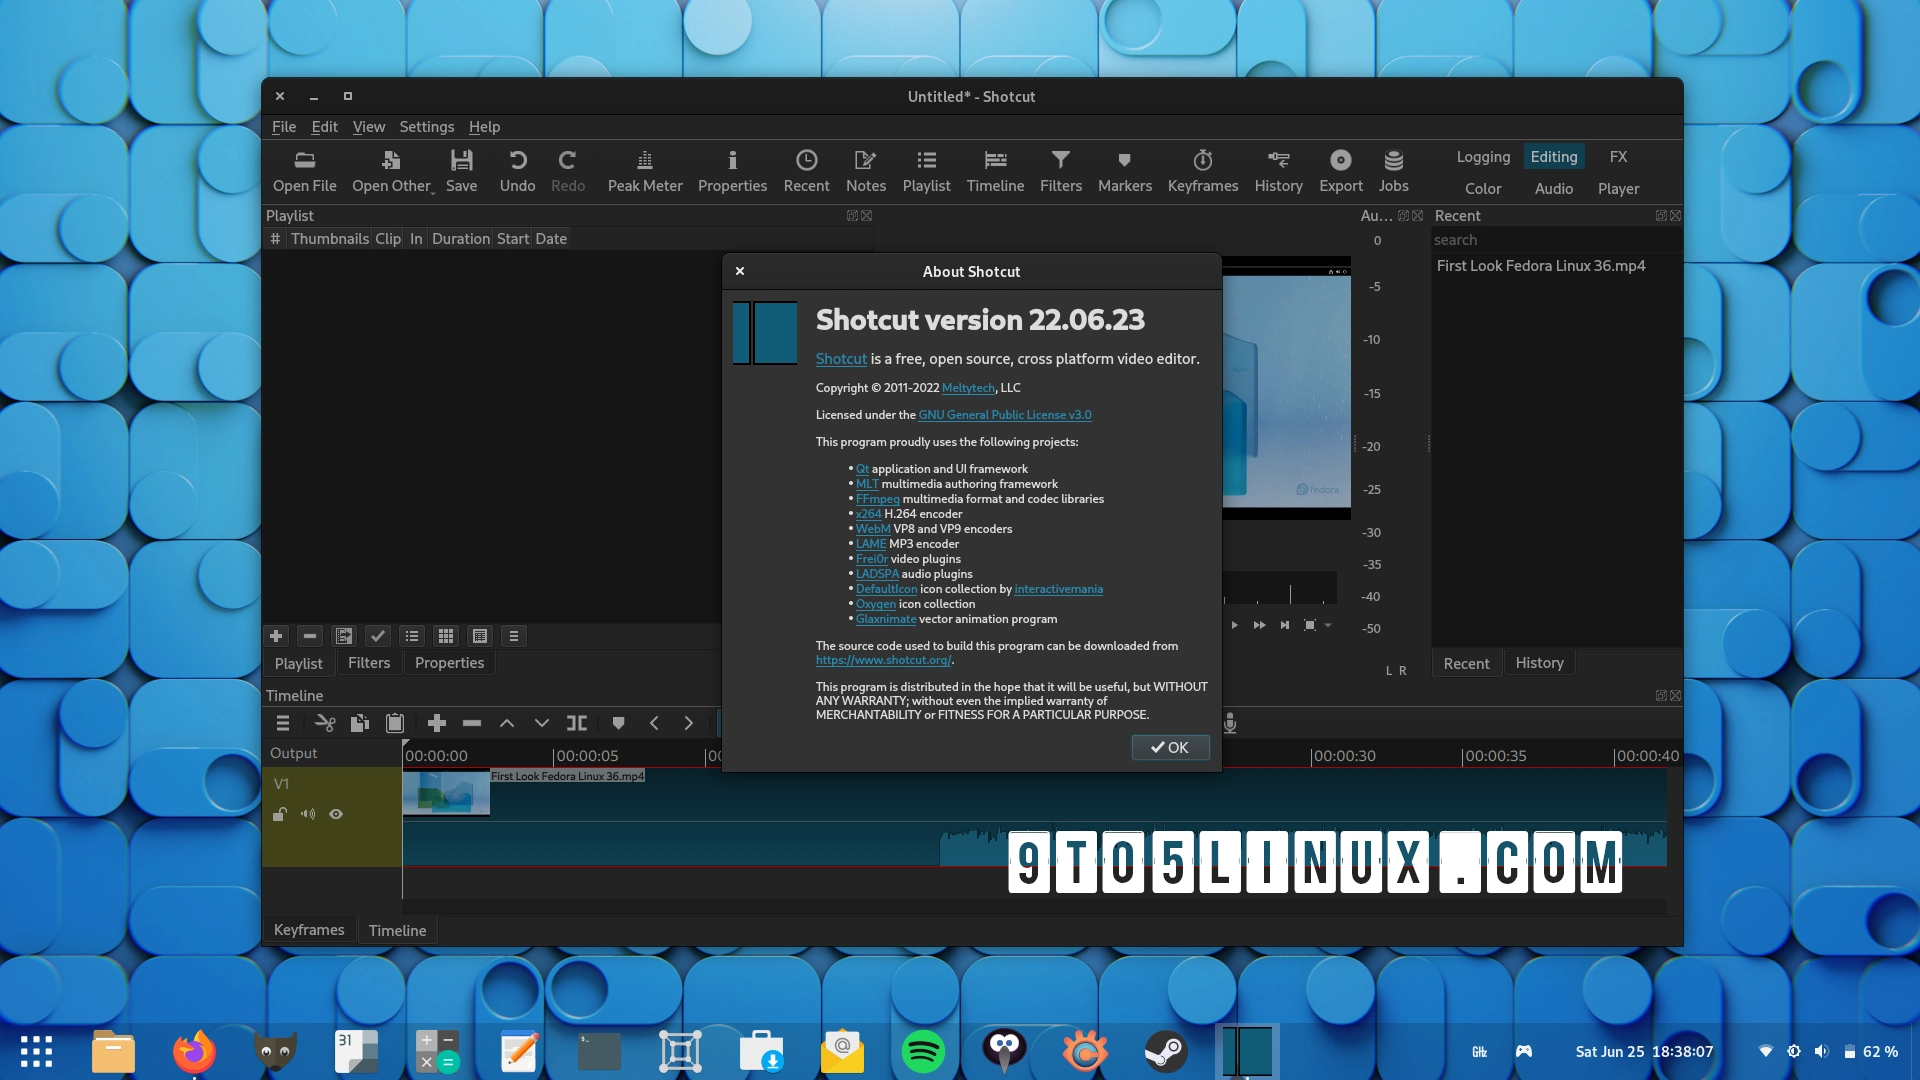 Shotcut 22.06 Video Editor Brings Glaxnimate Support, Keyframes Expansion, and More